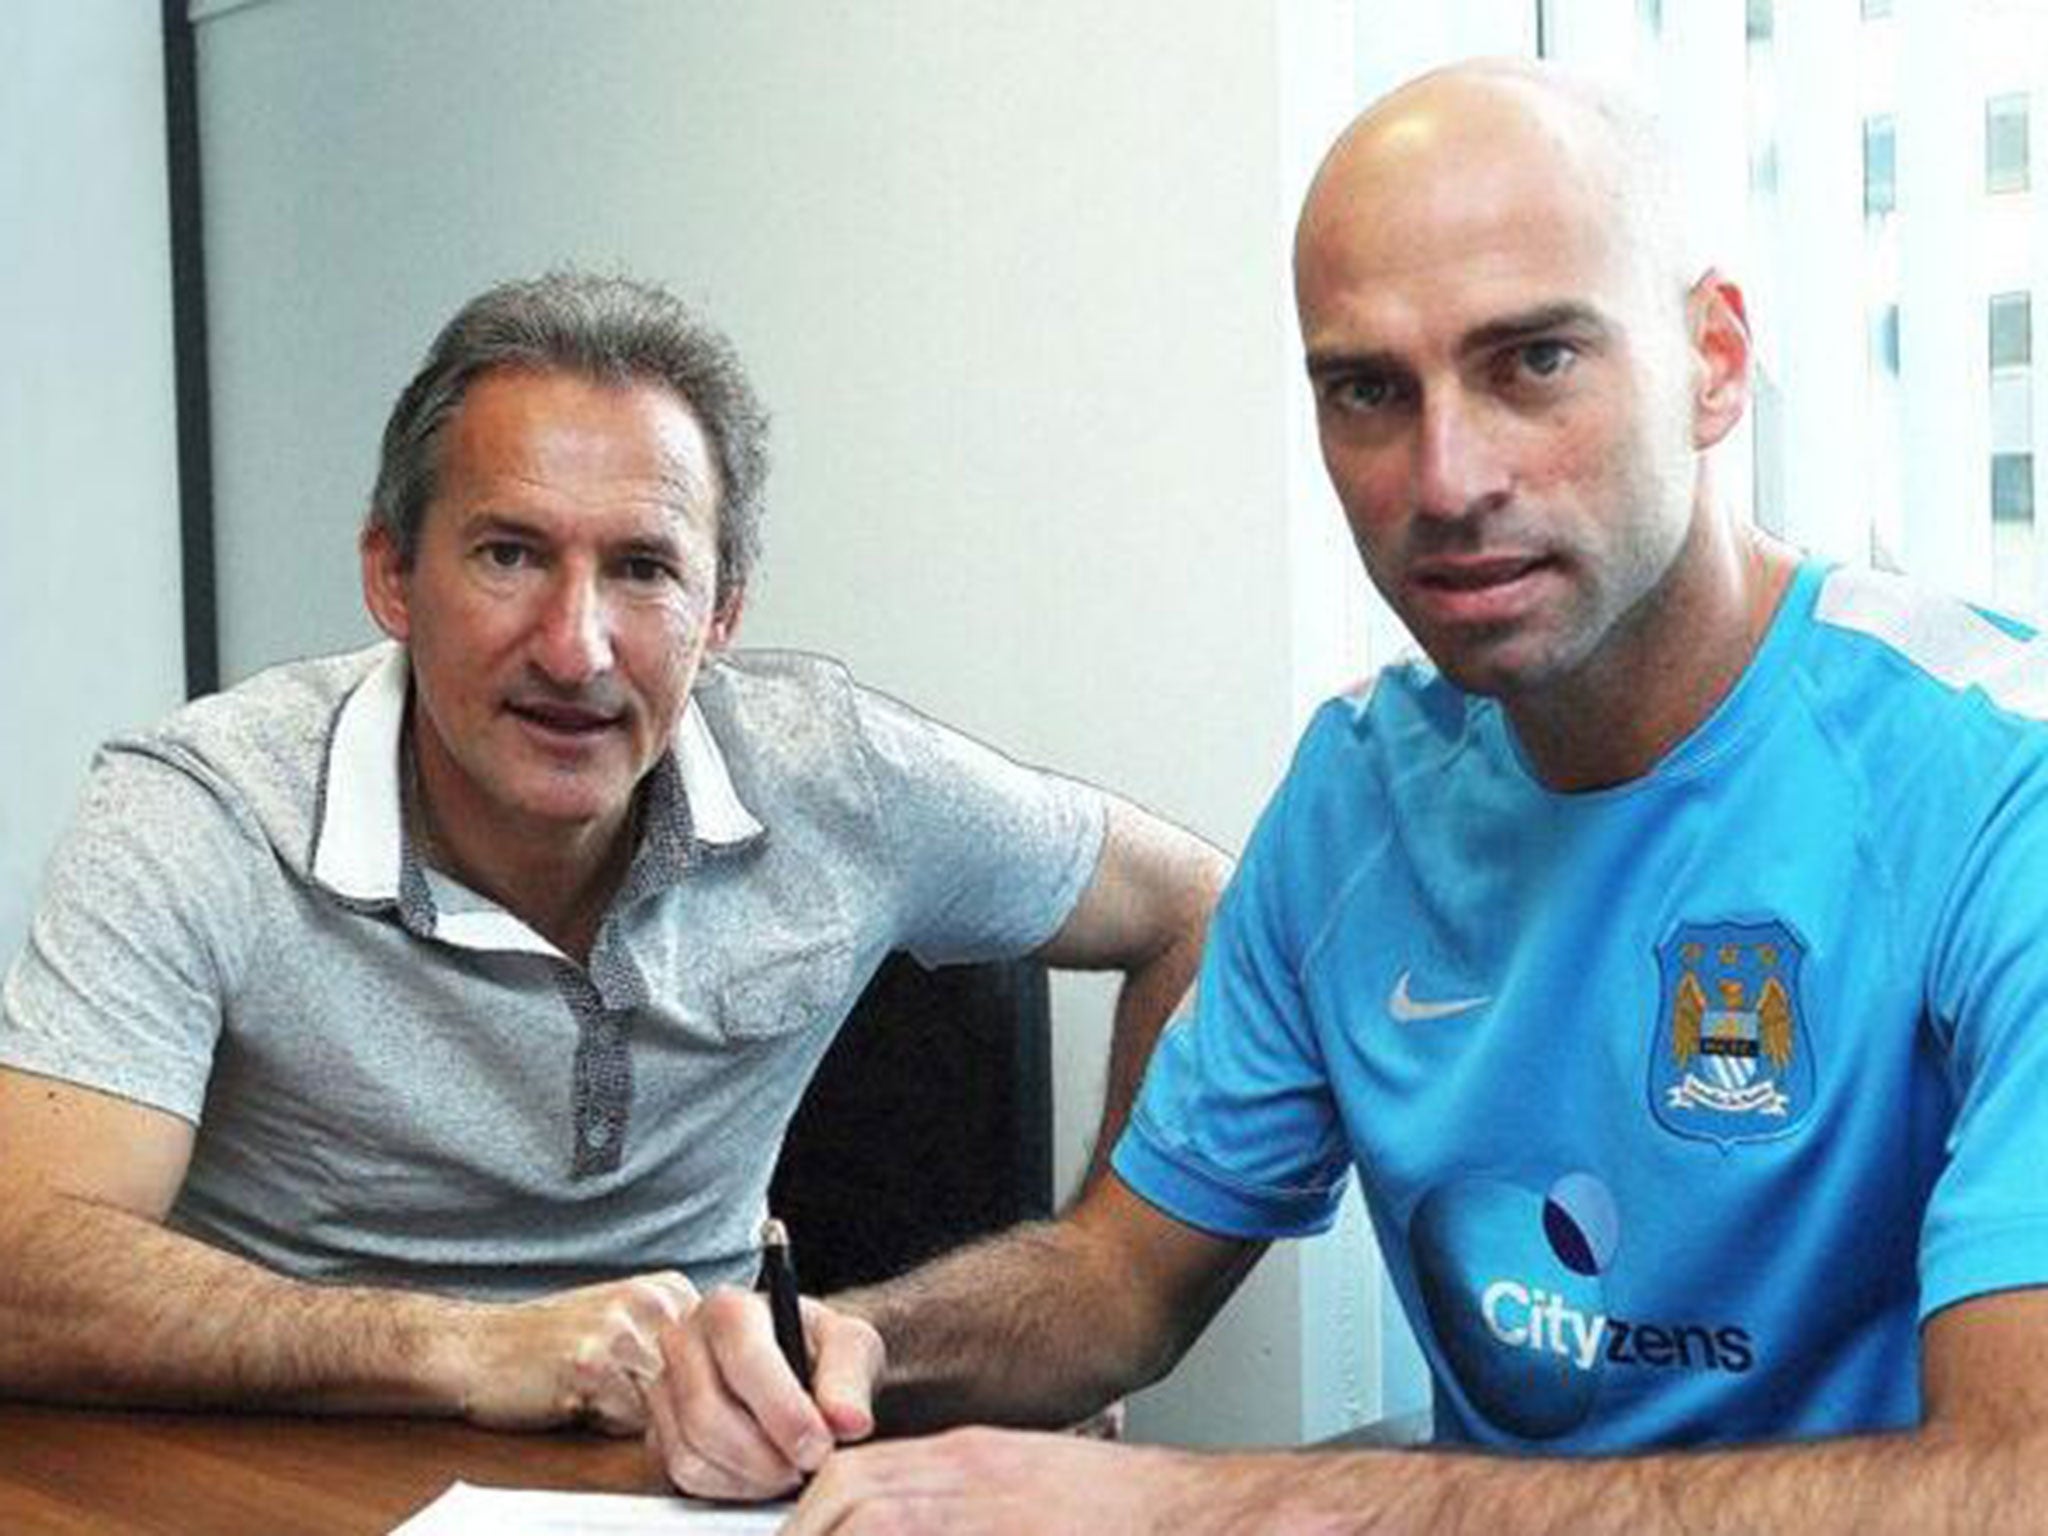 Former Malaga goalkeeper Willy Caballero has signed a three-year deal with Manchester City